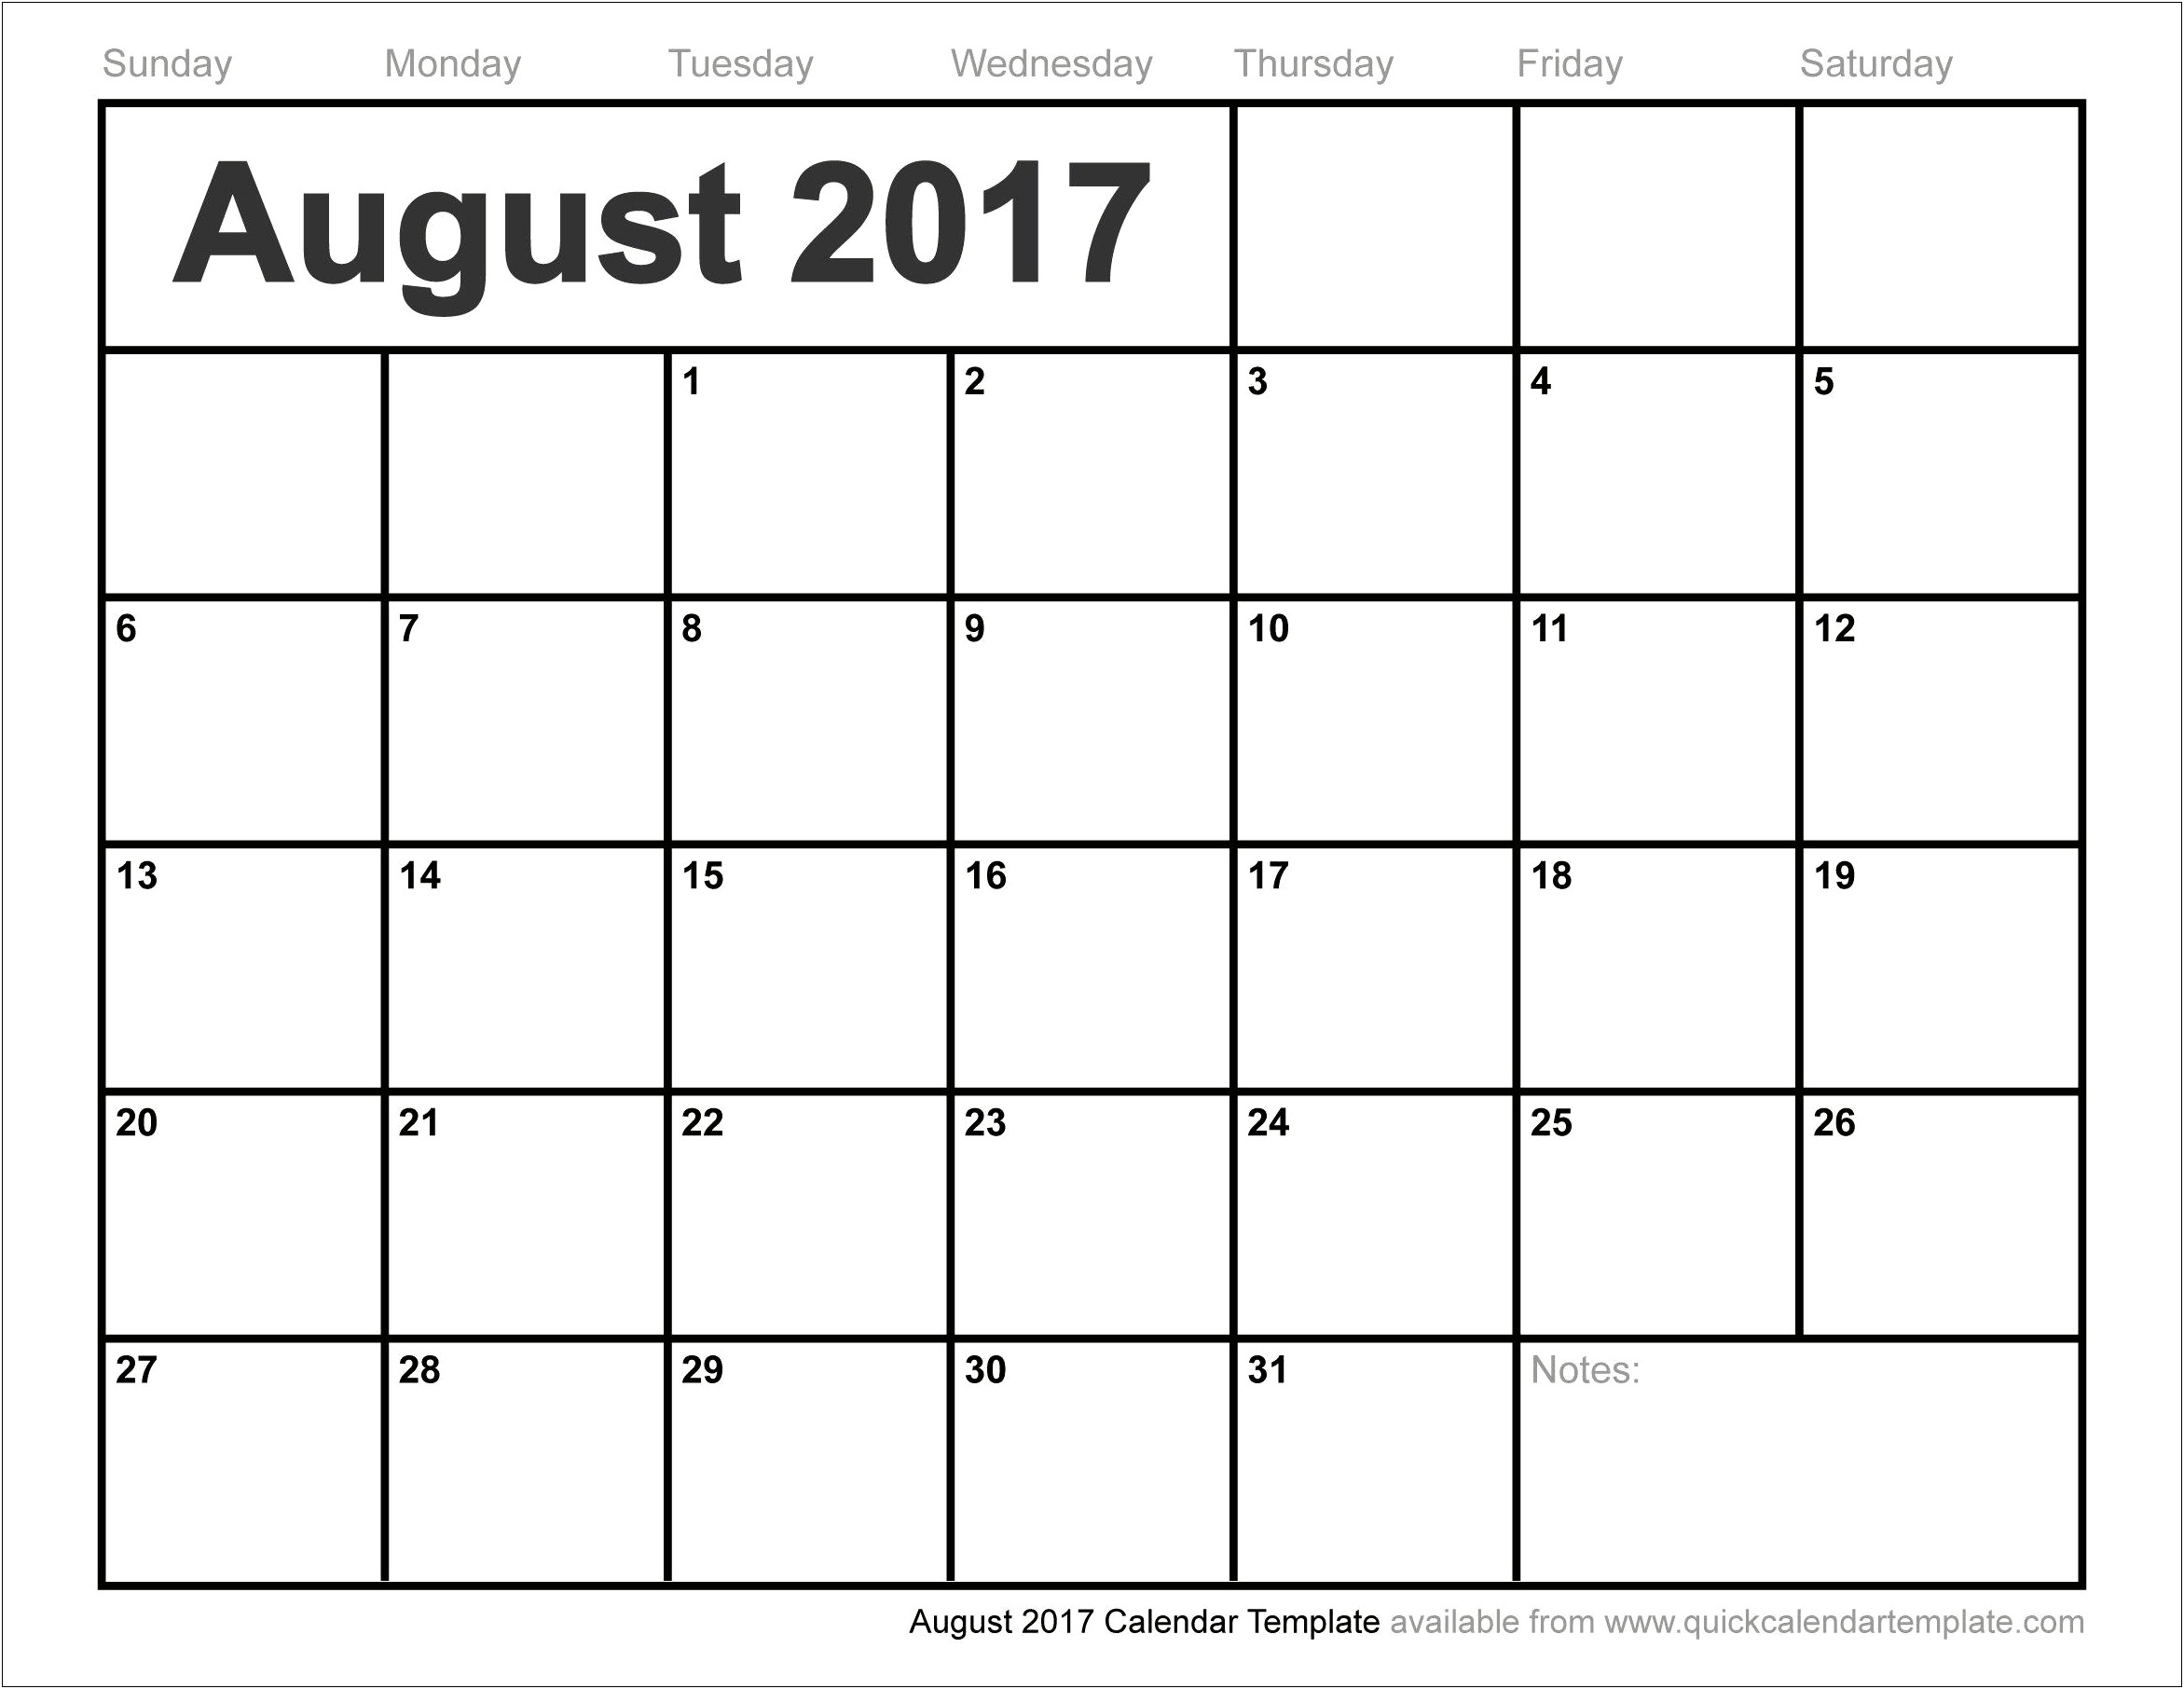 Free Monthly Calendar Template August 2017